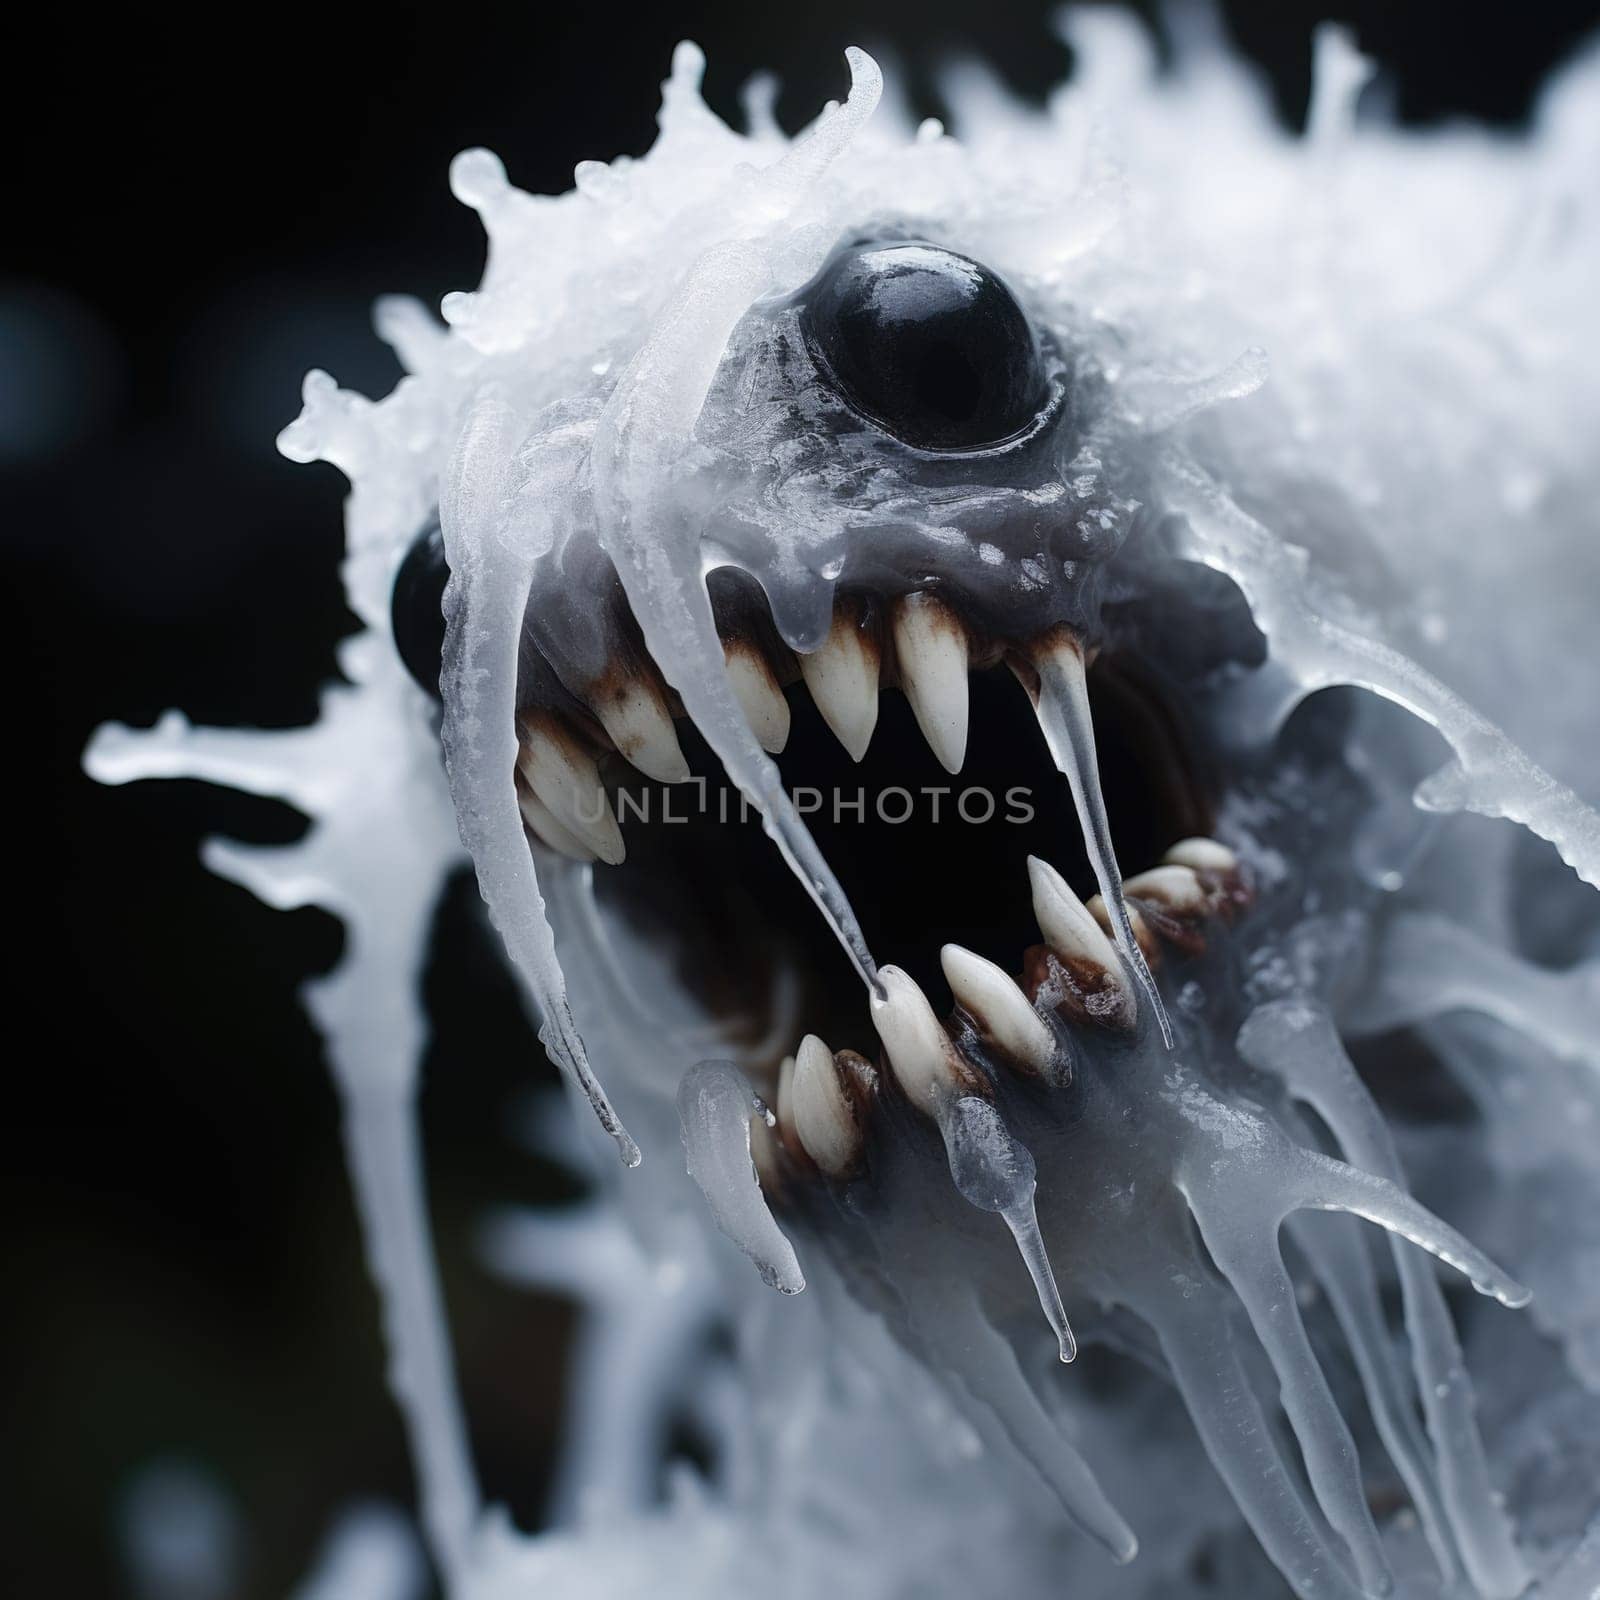 A close up of a frozen monster with its mouth open